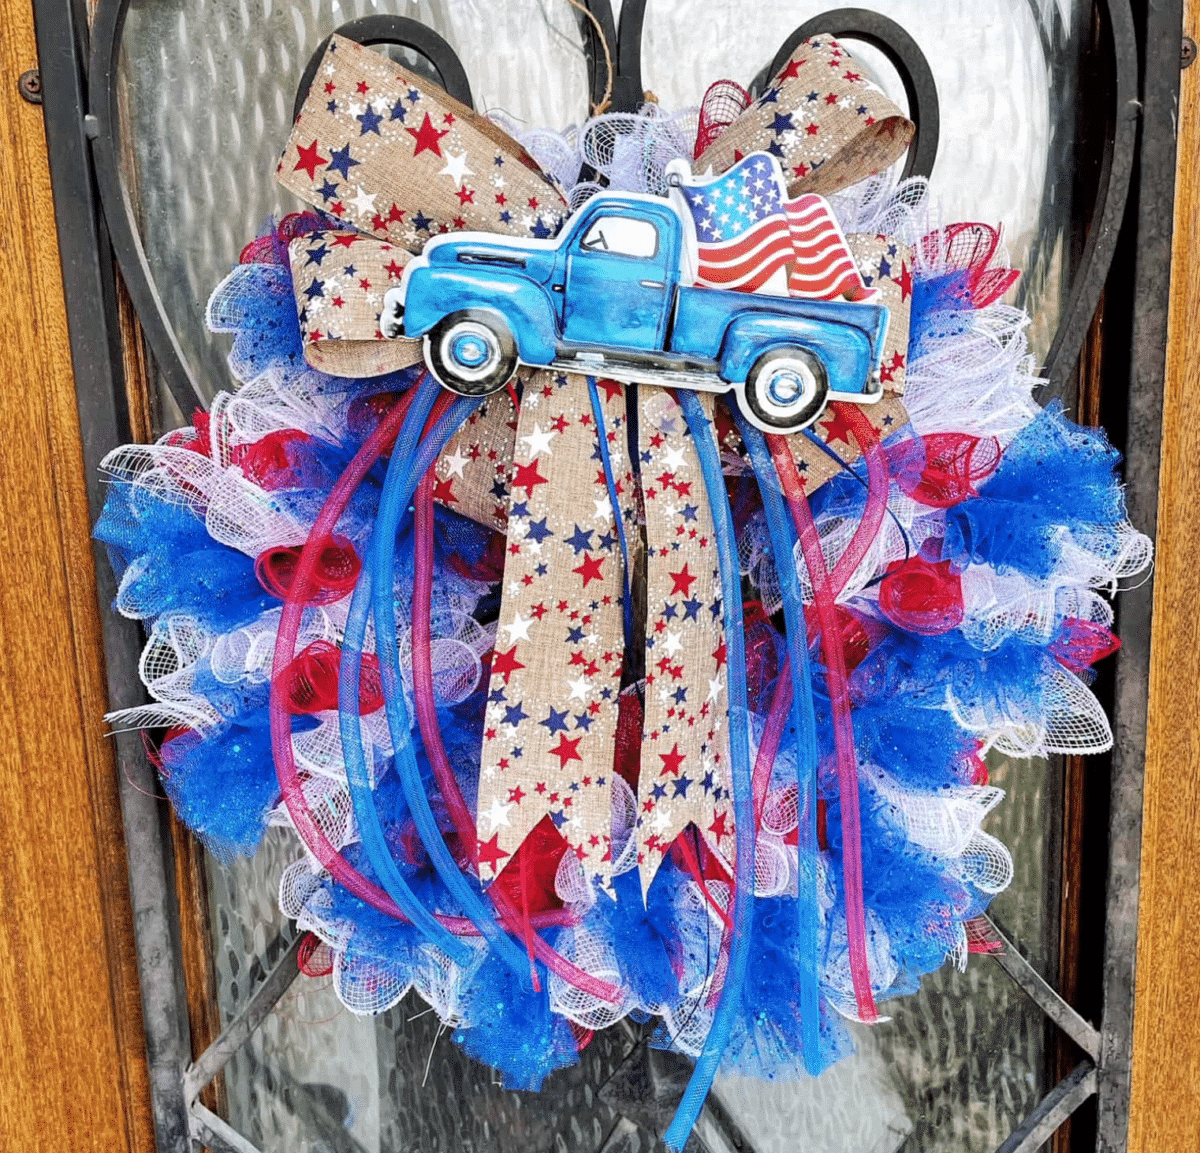 Fourth of July wreaths, showcasing red, white, and blue colors, stars, and a central vintage truck motif, displayed on a door.